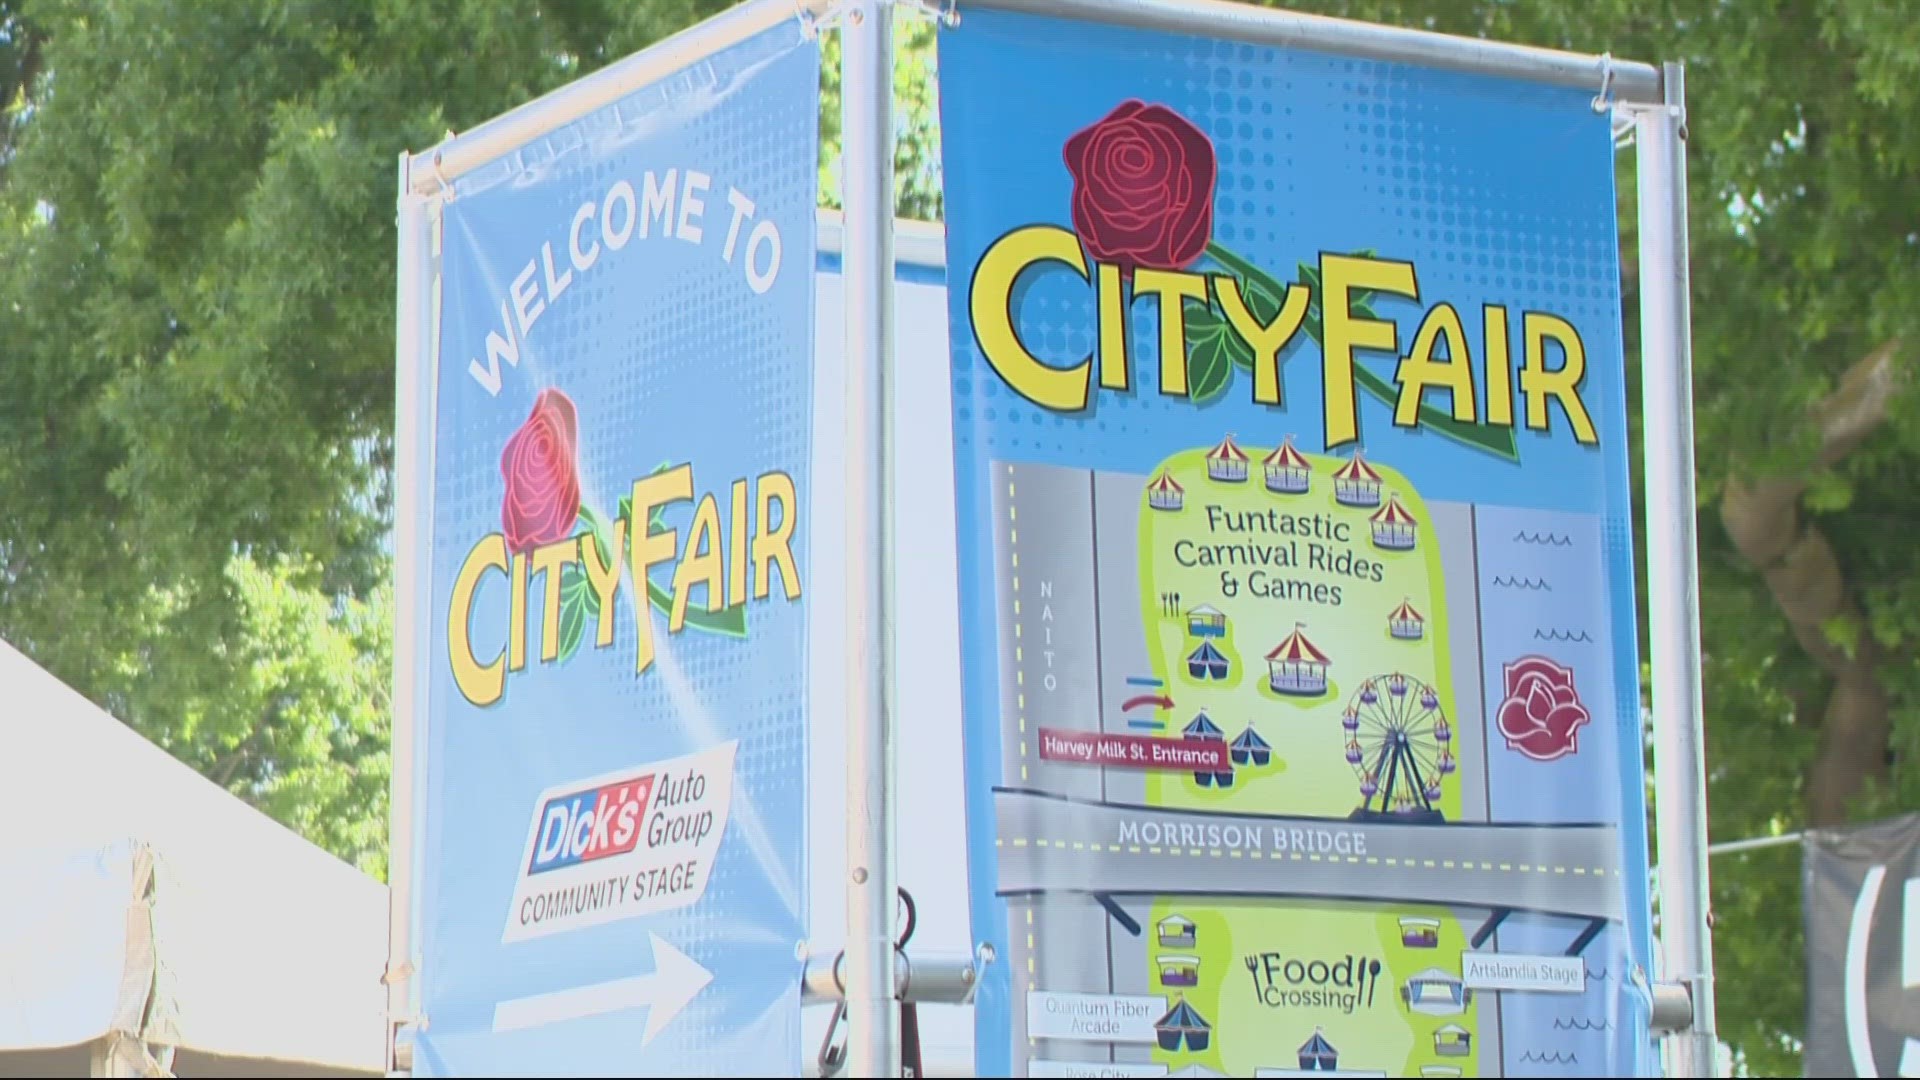 Thinking of heading to Rose Festival CityFair? From parking to food and rides, here’s what it may cost families to attend.